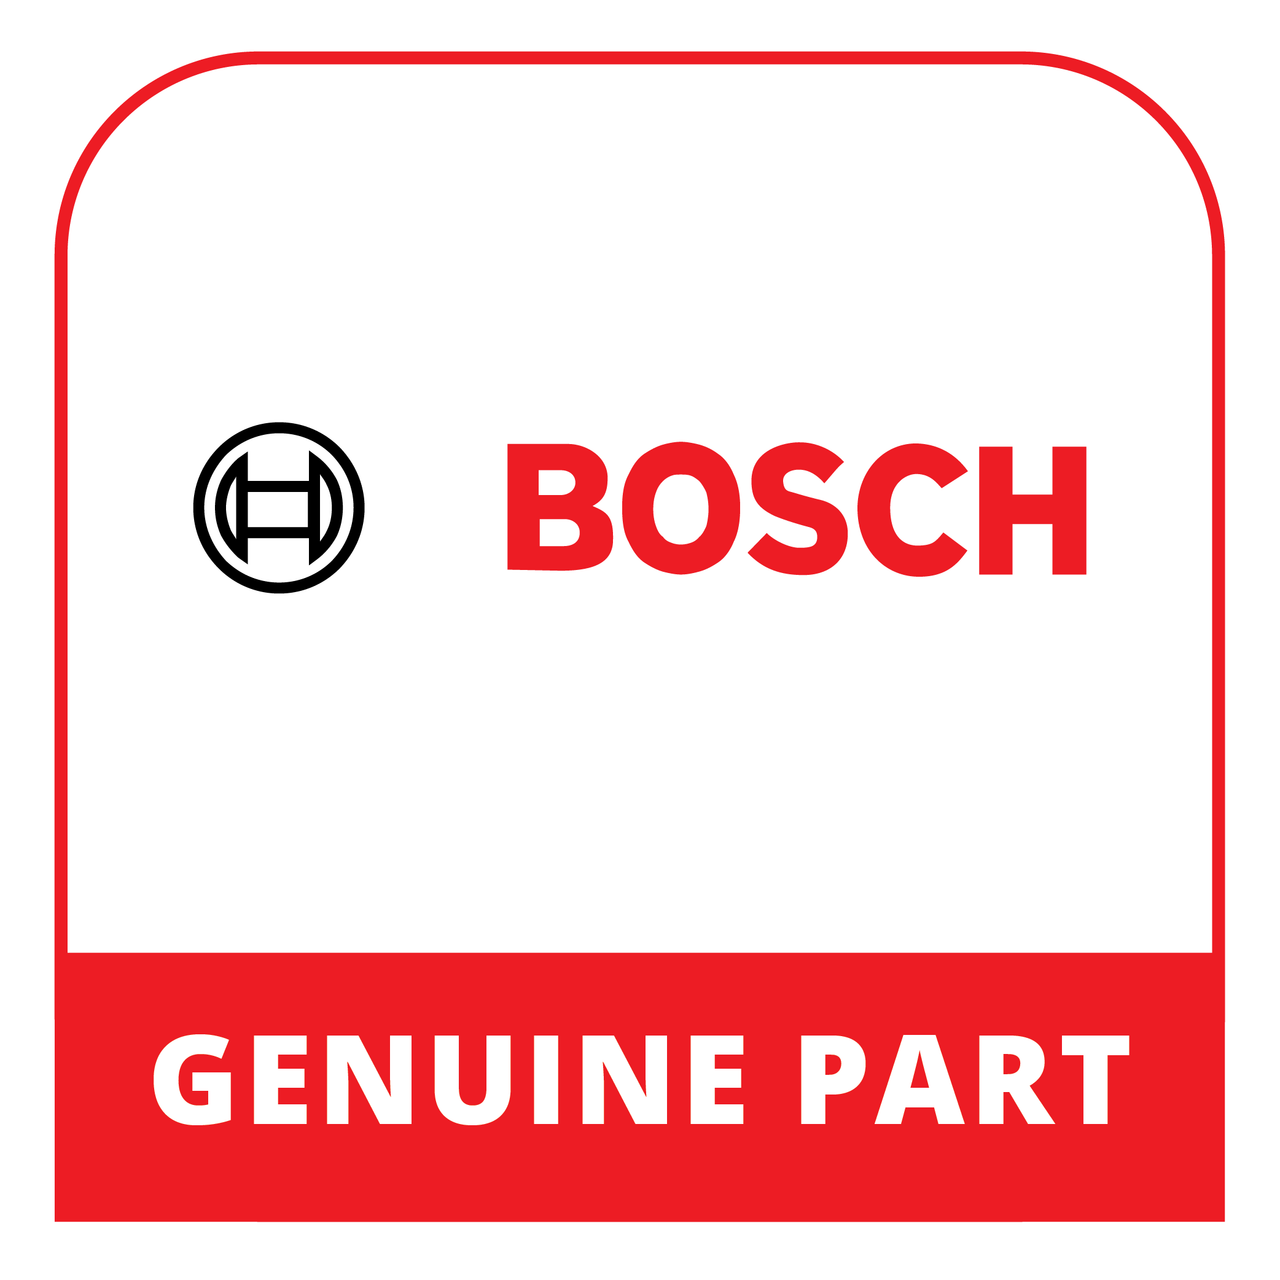 Bosch (Thermador) 11032252 - Filter Bypass - Genuine Bosch (Thermador) Part